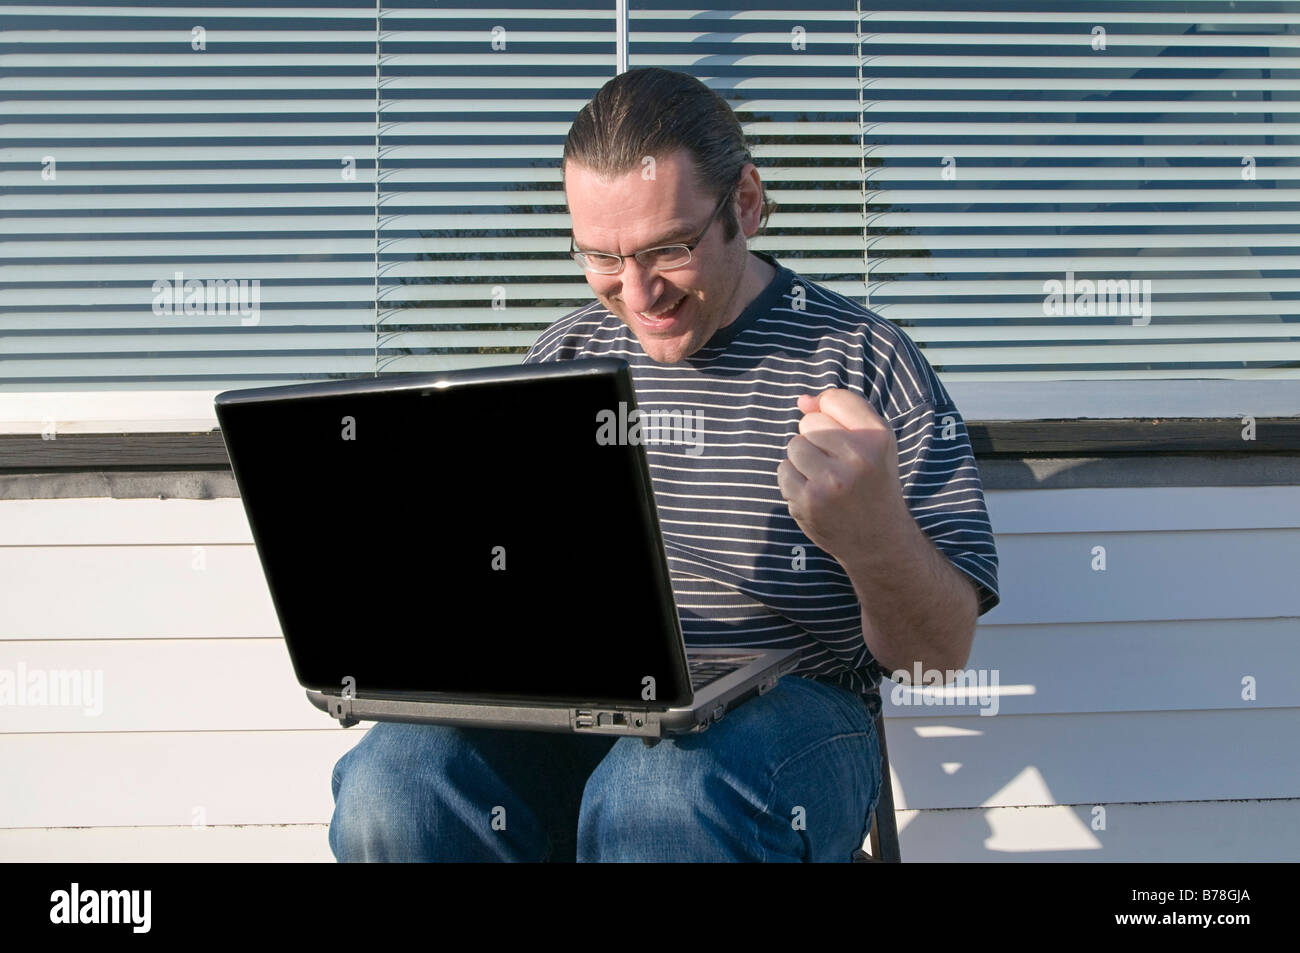 Man sitting on balcony with a laptop, balling his fist Stock Photo